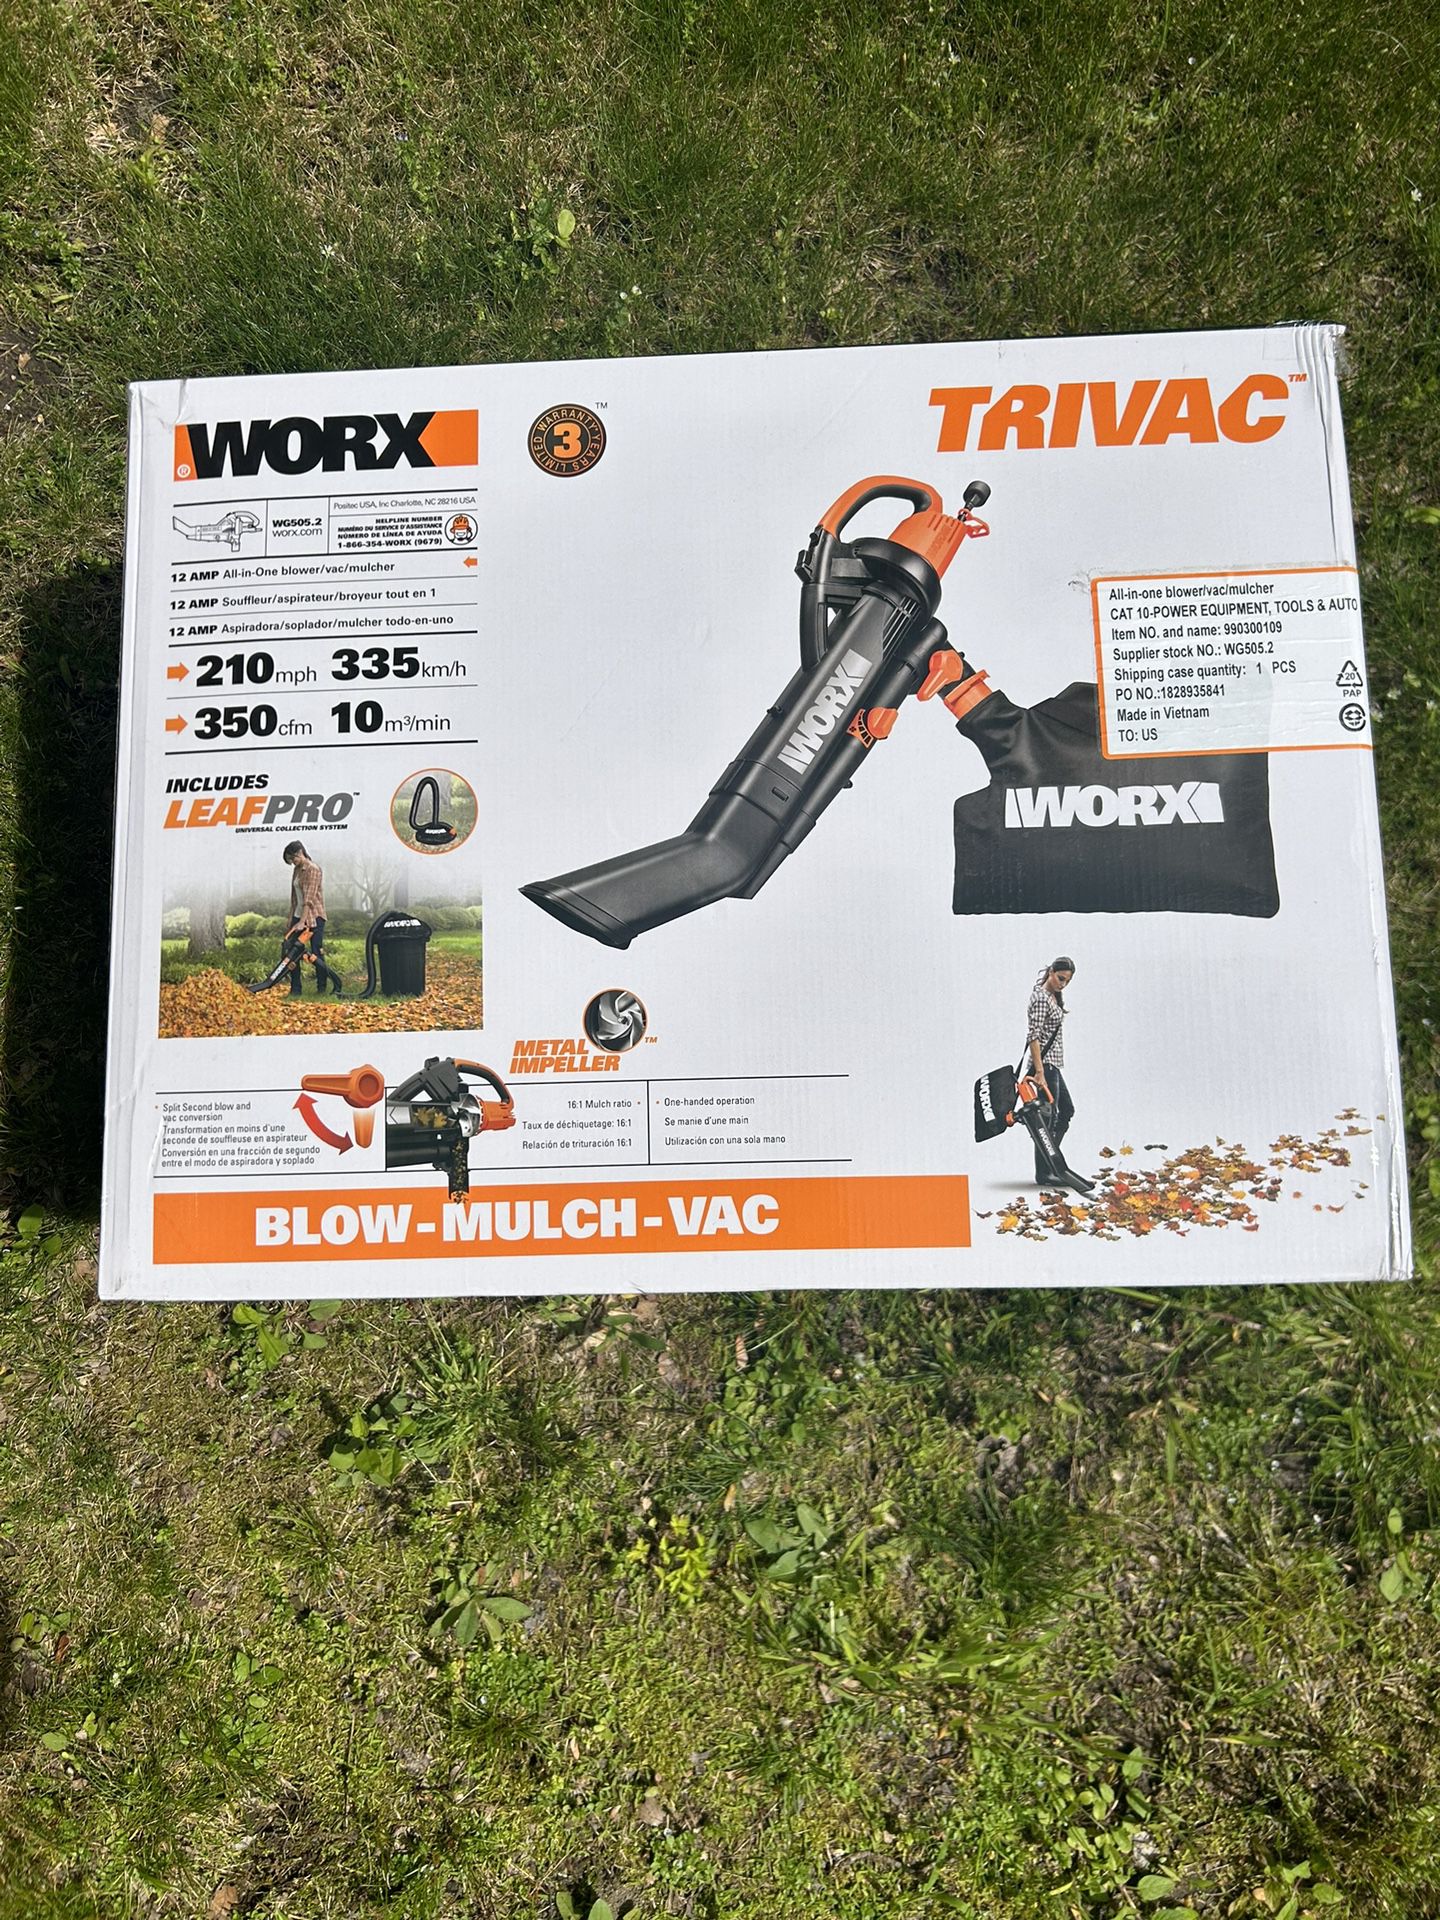 Worx 12V All-in-one Leaf Blower/Vacuum/Mulcher with Leaf Pro collection system.